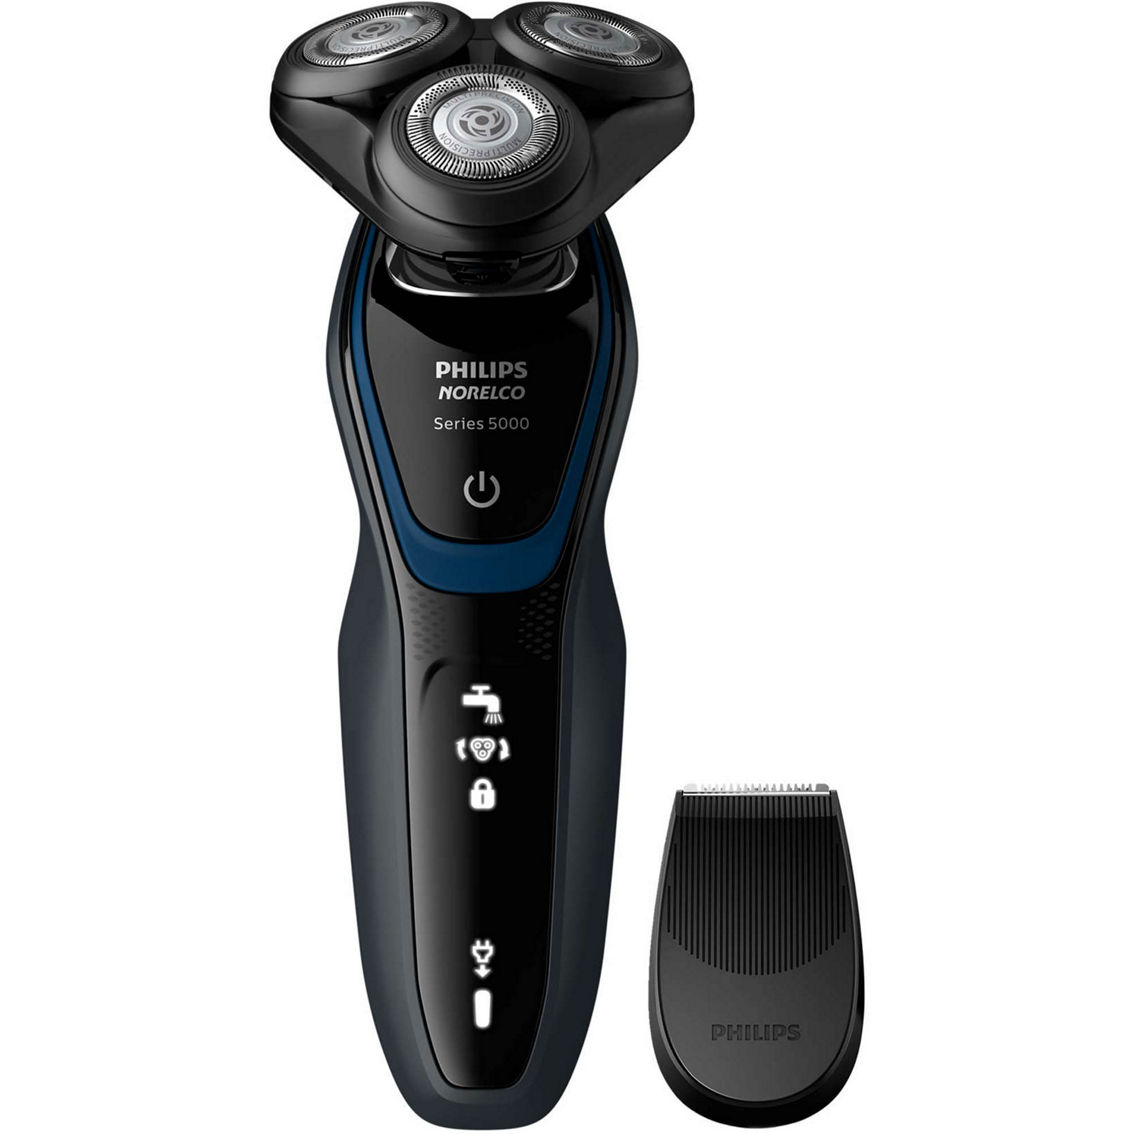 Philips Norelco 5300 Shaver - Image 3 of 9